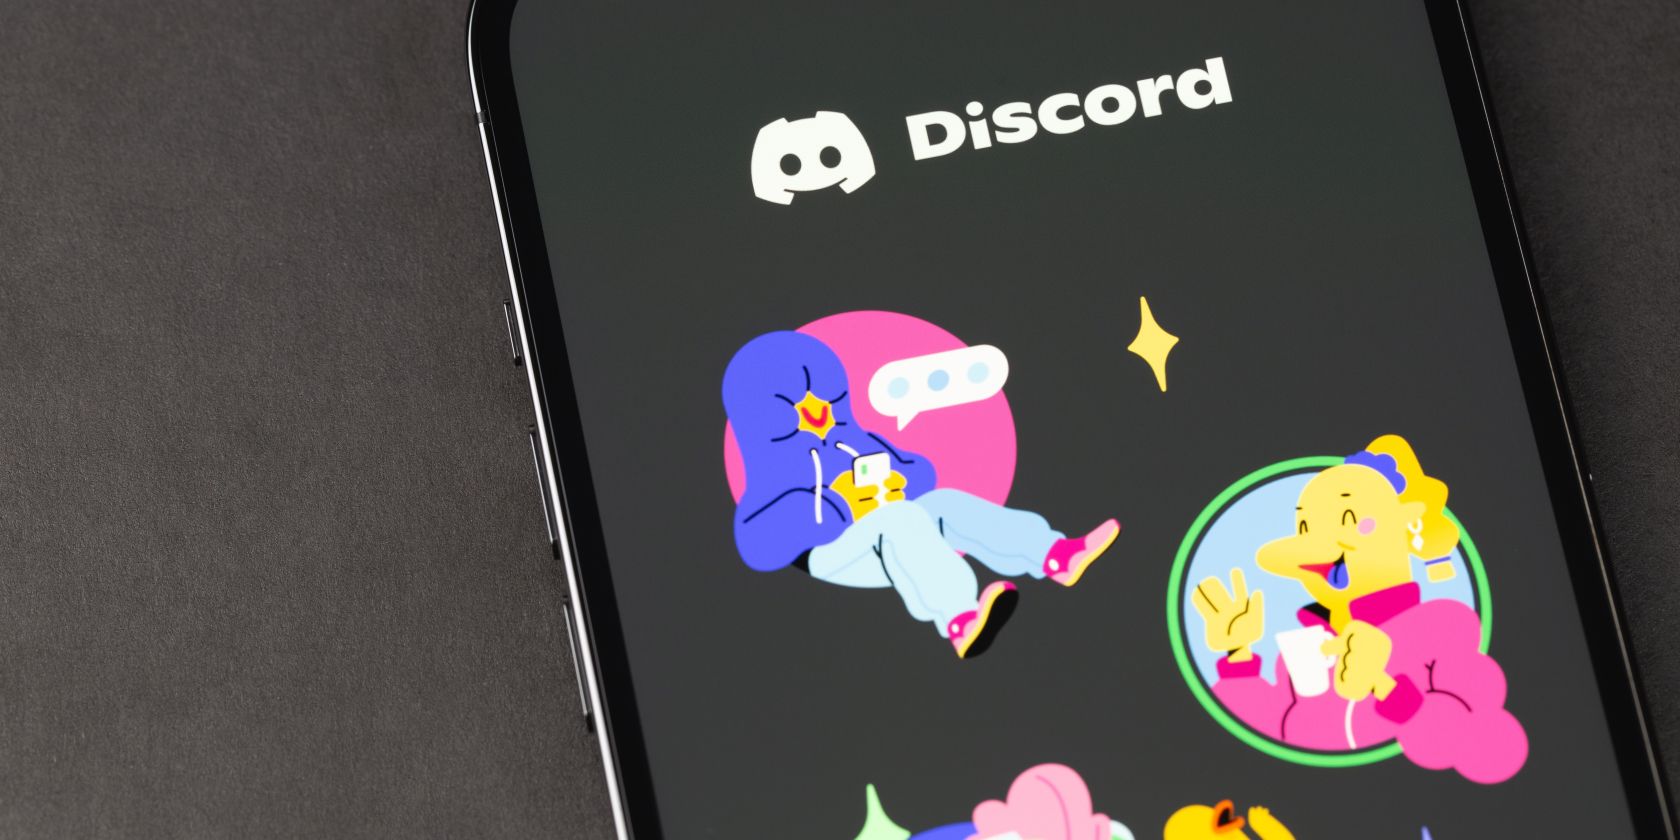 discord logo and colorful characters on phone screen